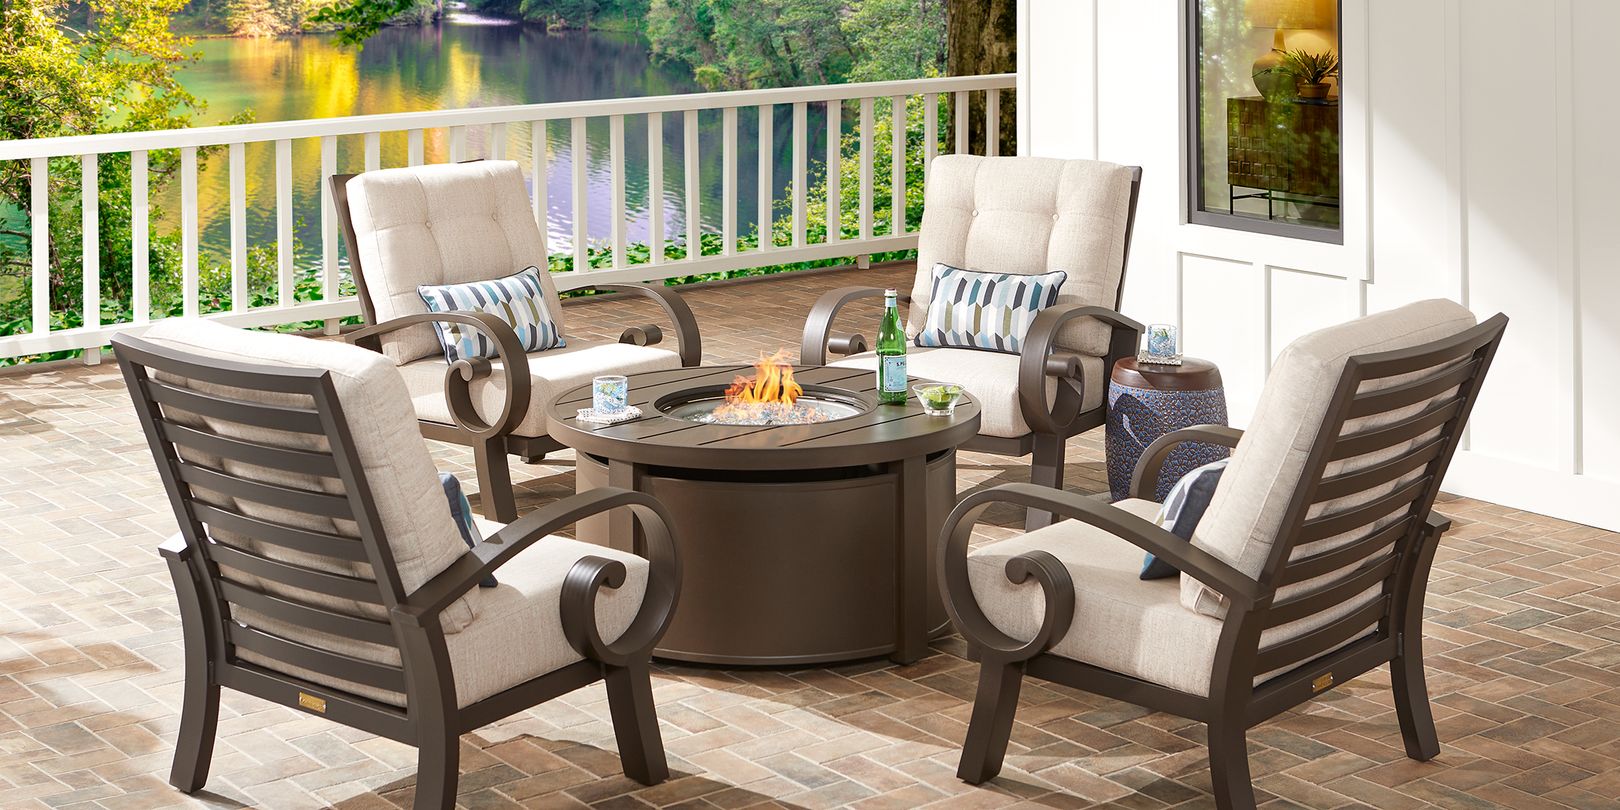 Photo of bronze metal patio seating set arranged around a fire pit